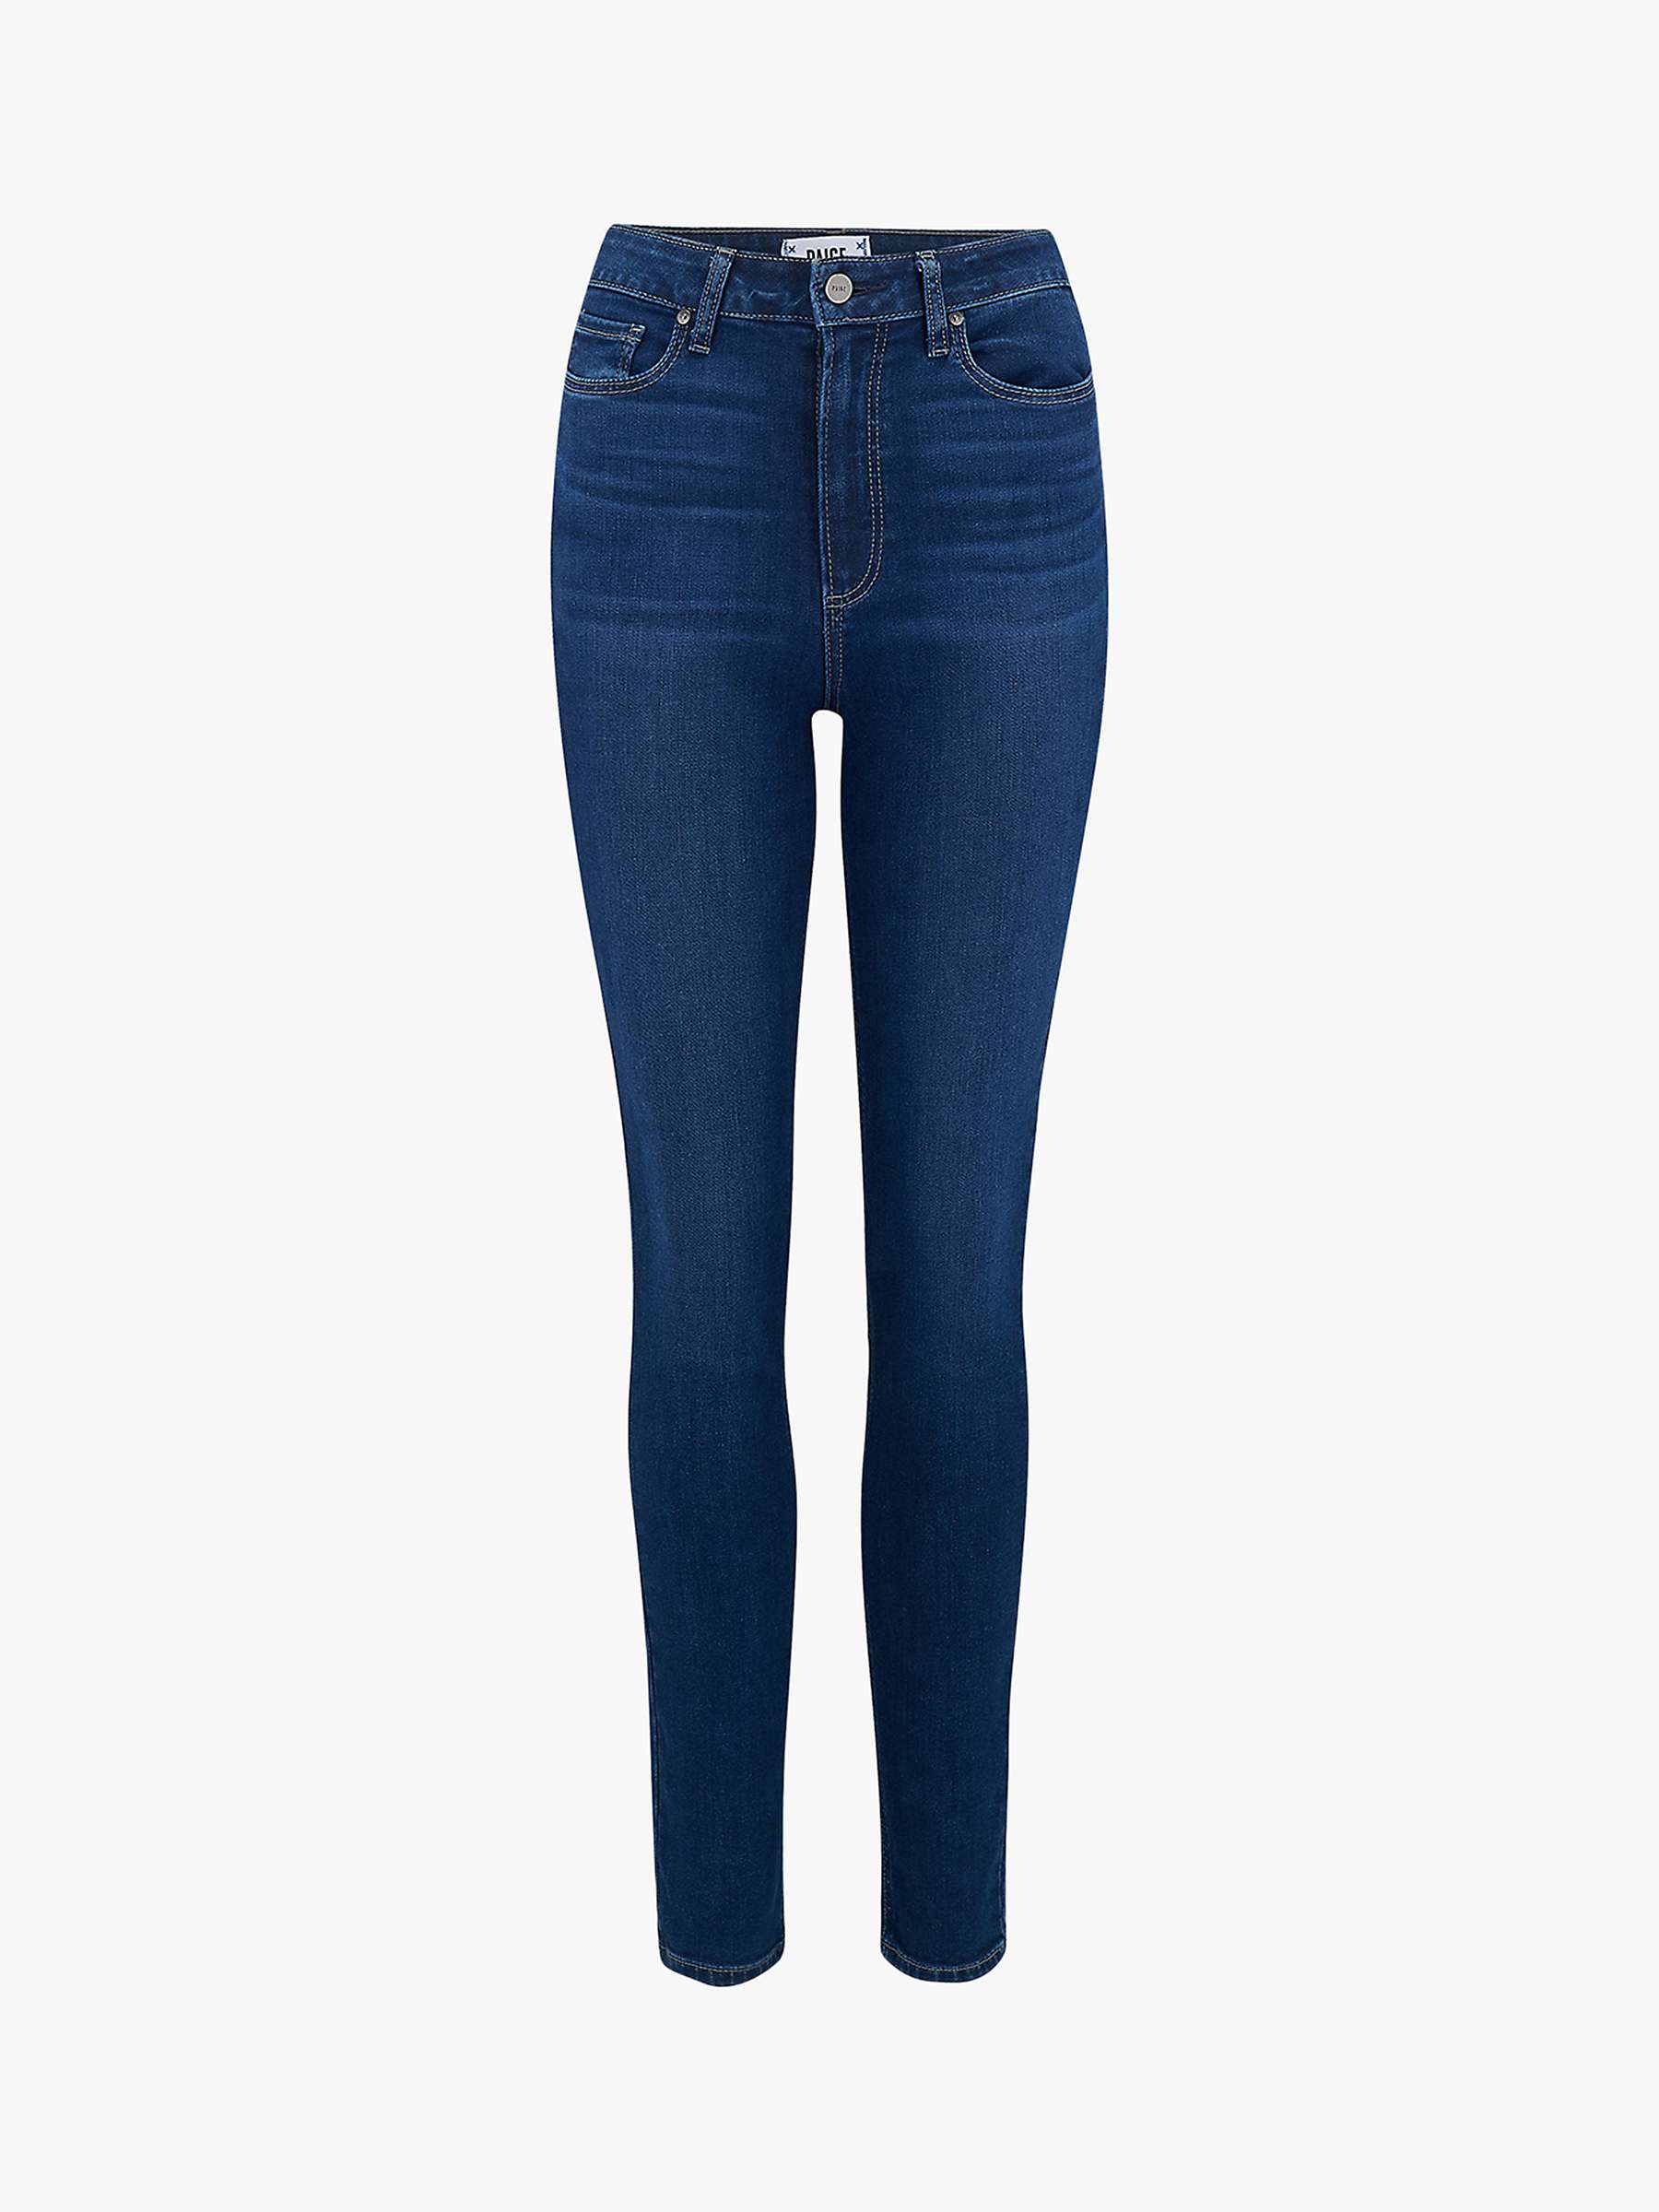 Buy PAIGE Margot High Rise Ultra Skinny Jeans, Brentwood Mid Wash Online at johnlewis.com